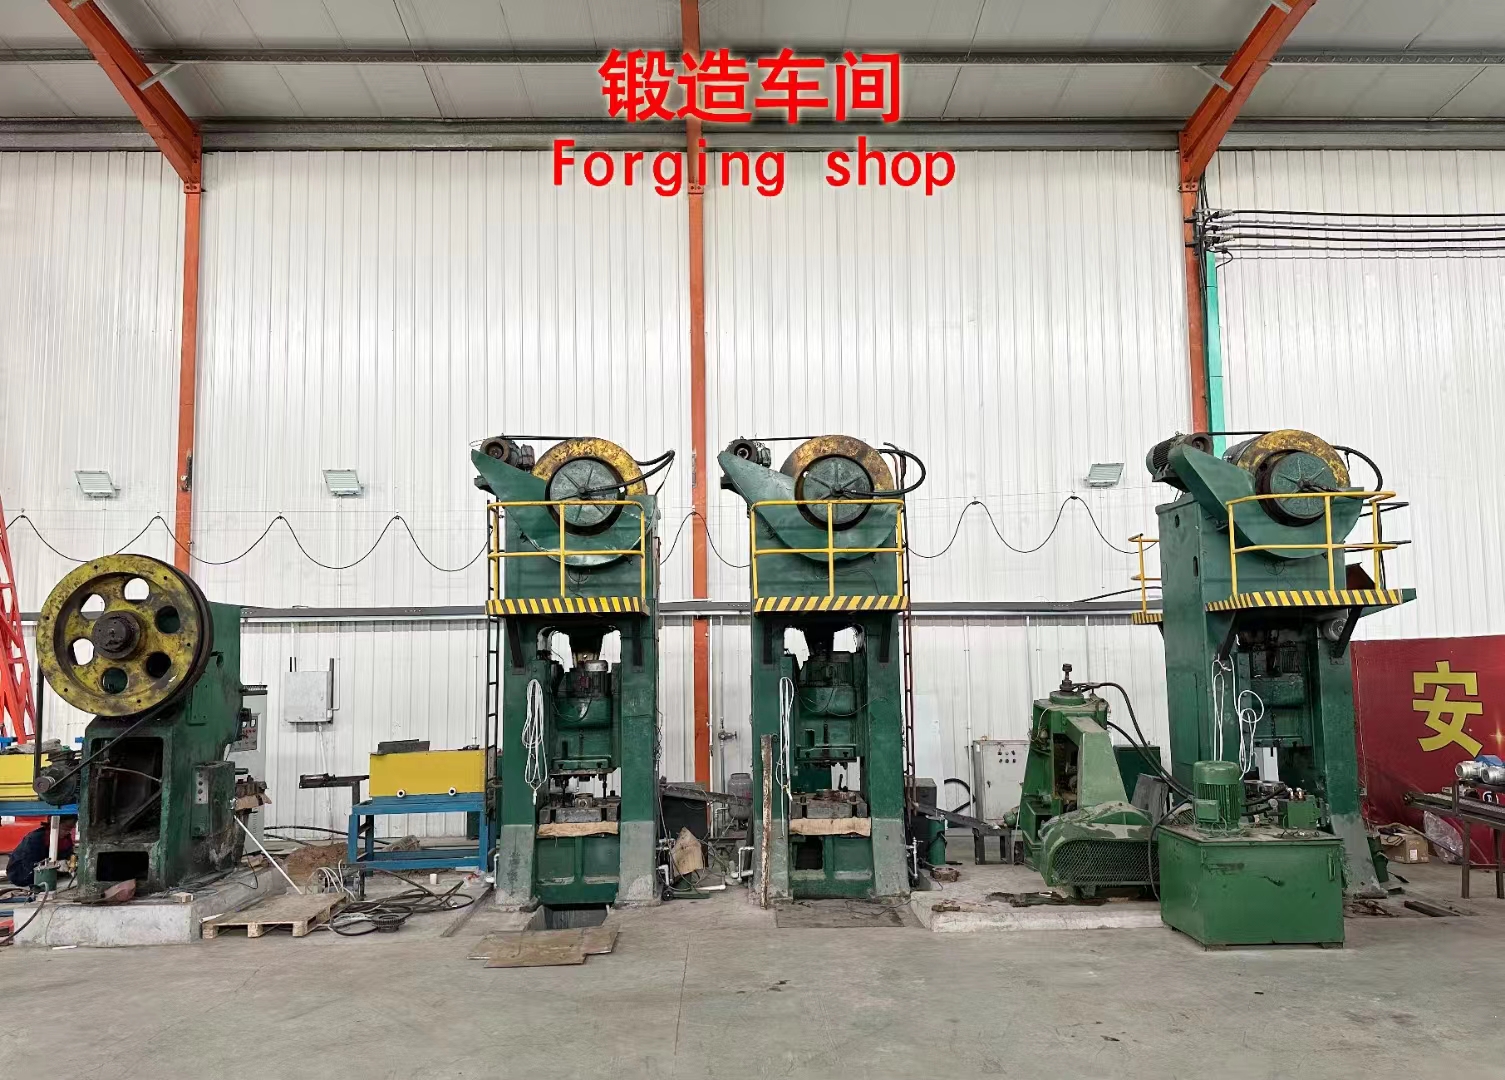 The status and function of forging in machinery manufacturing industry